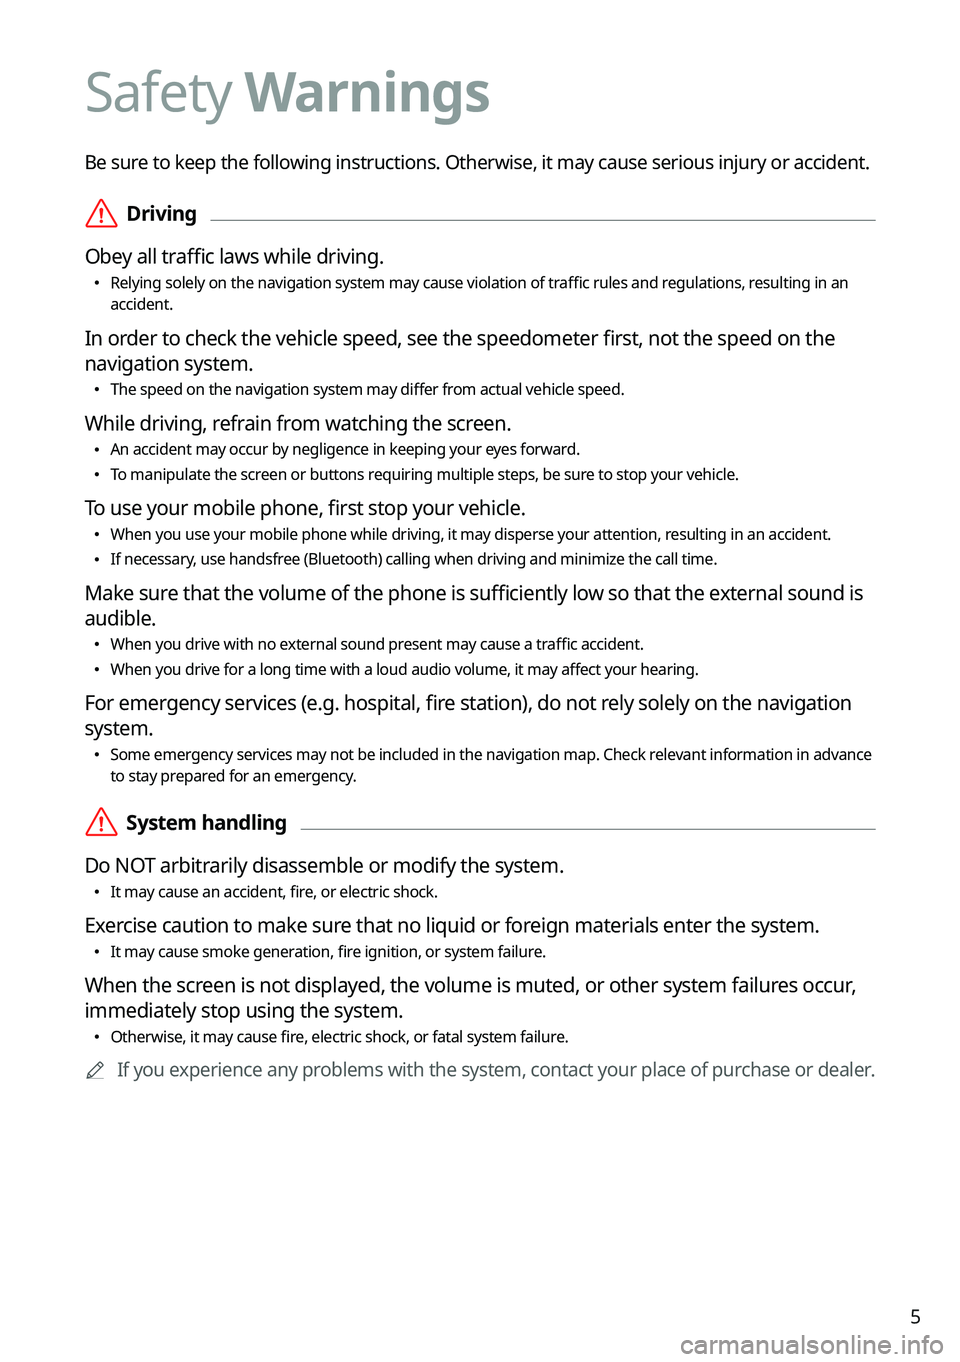 KIA CARNIVAL 2022  Navigation System Quick Reference Guide 5
Be sure to keep the following instructions. Otherwise, it may cause serious injury or accident.
 ÝDriving
Obey all traffic laws while driving.
 • Relying solely on the navigation system may cause